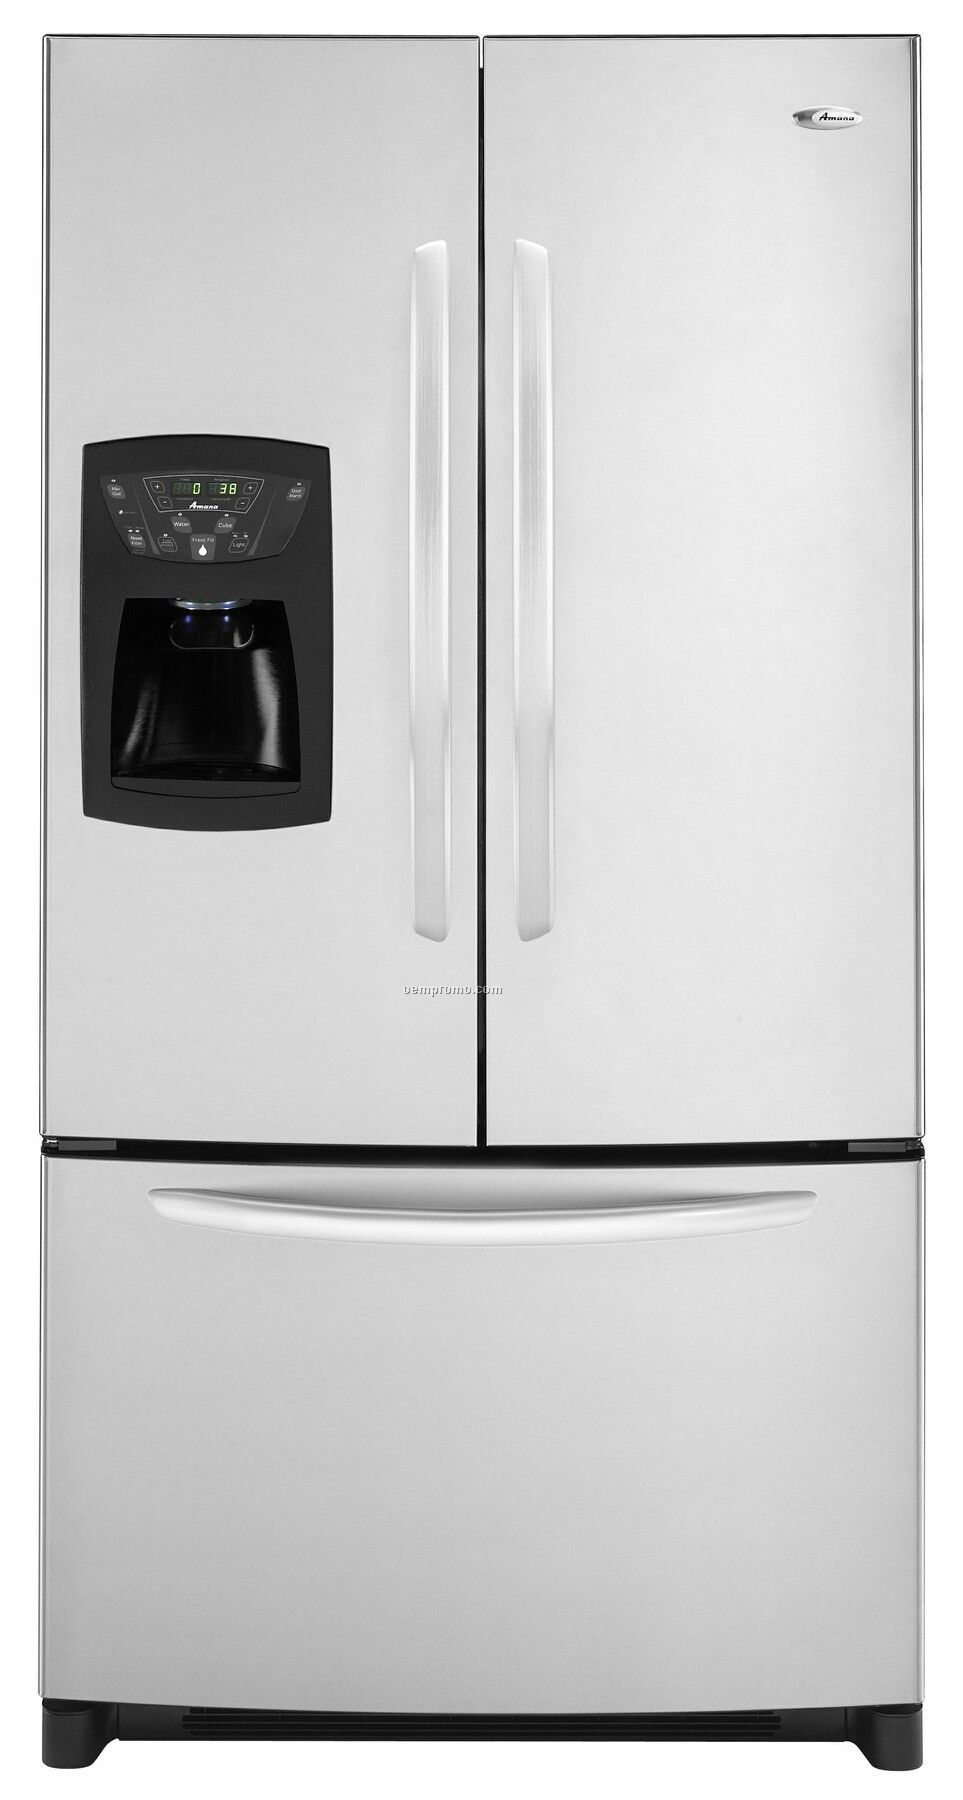 Amana 25 Cubic Foot French Door Refrigerator (Stainless Steel)